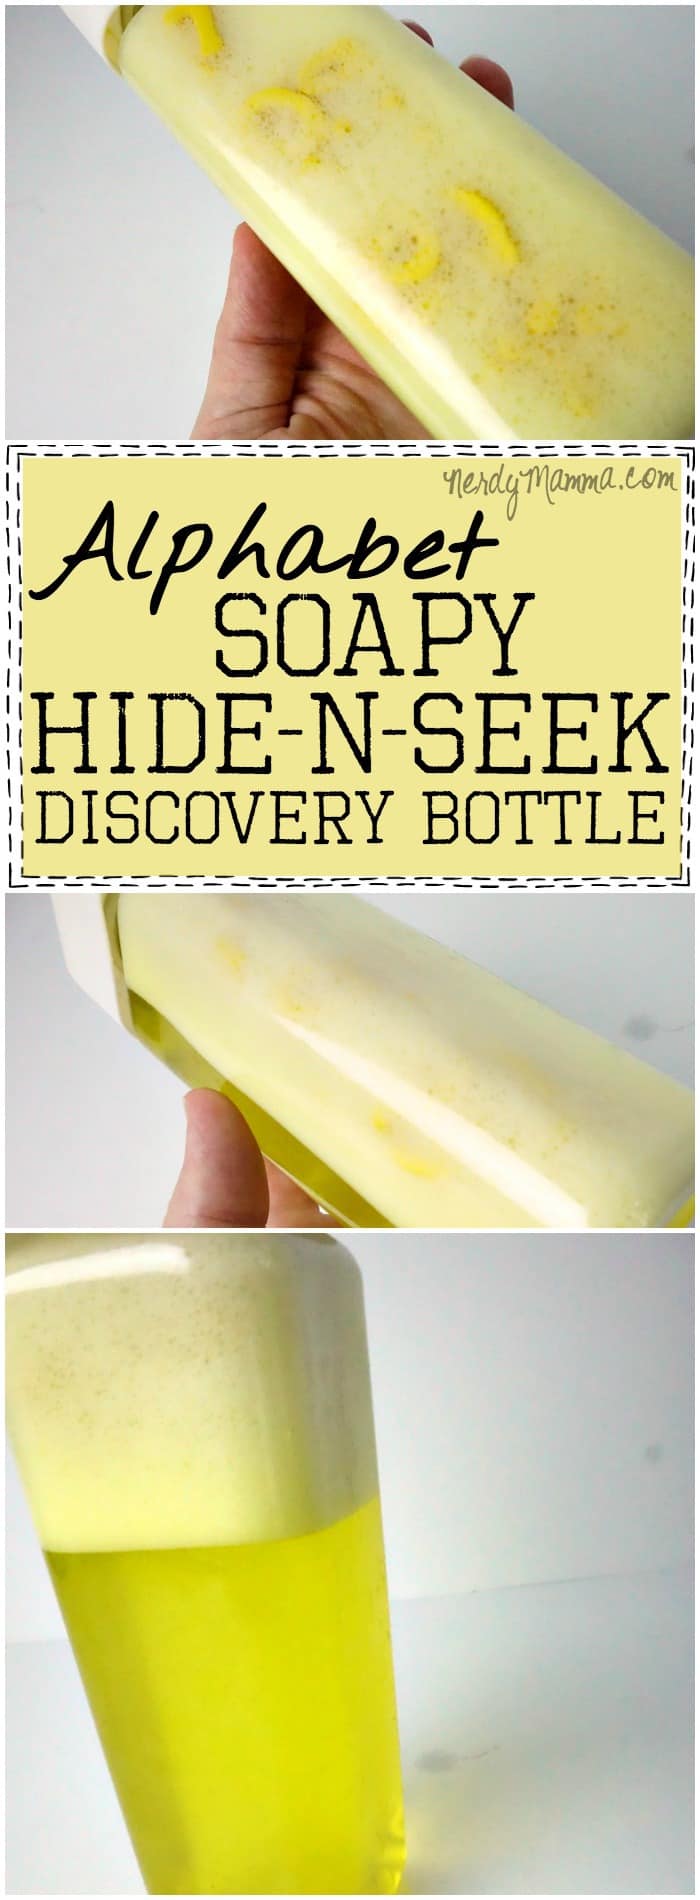 I can't wait to make this cute hide and seek alphabet discovery bottle for my kids! So easy and cute!